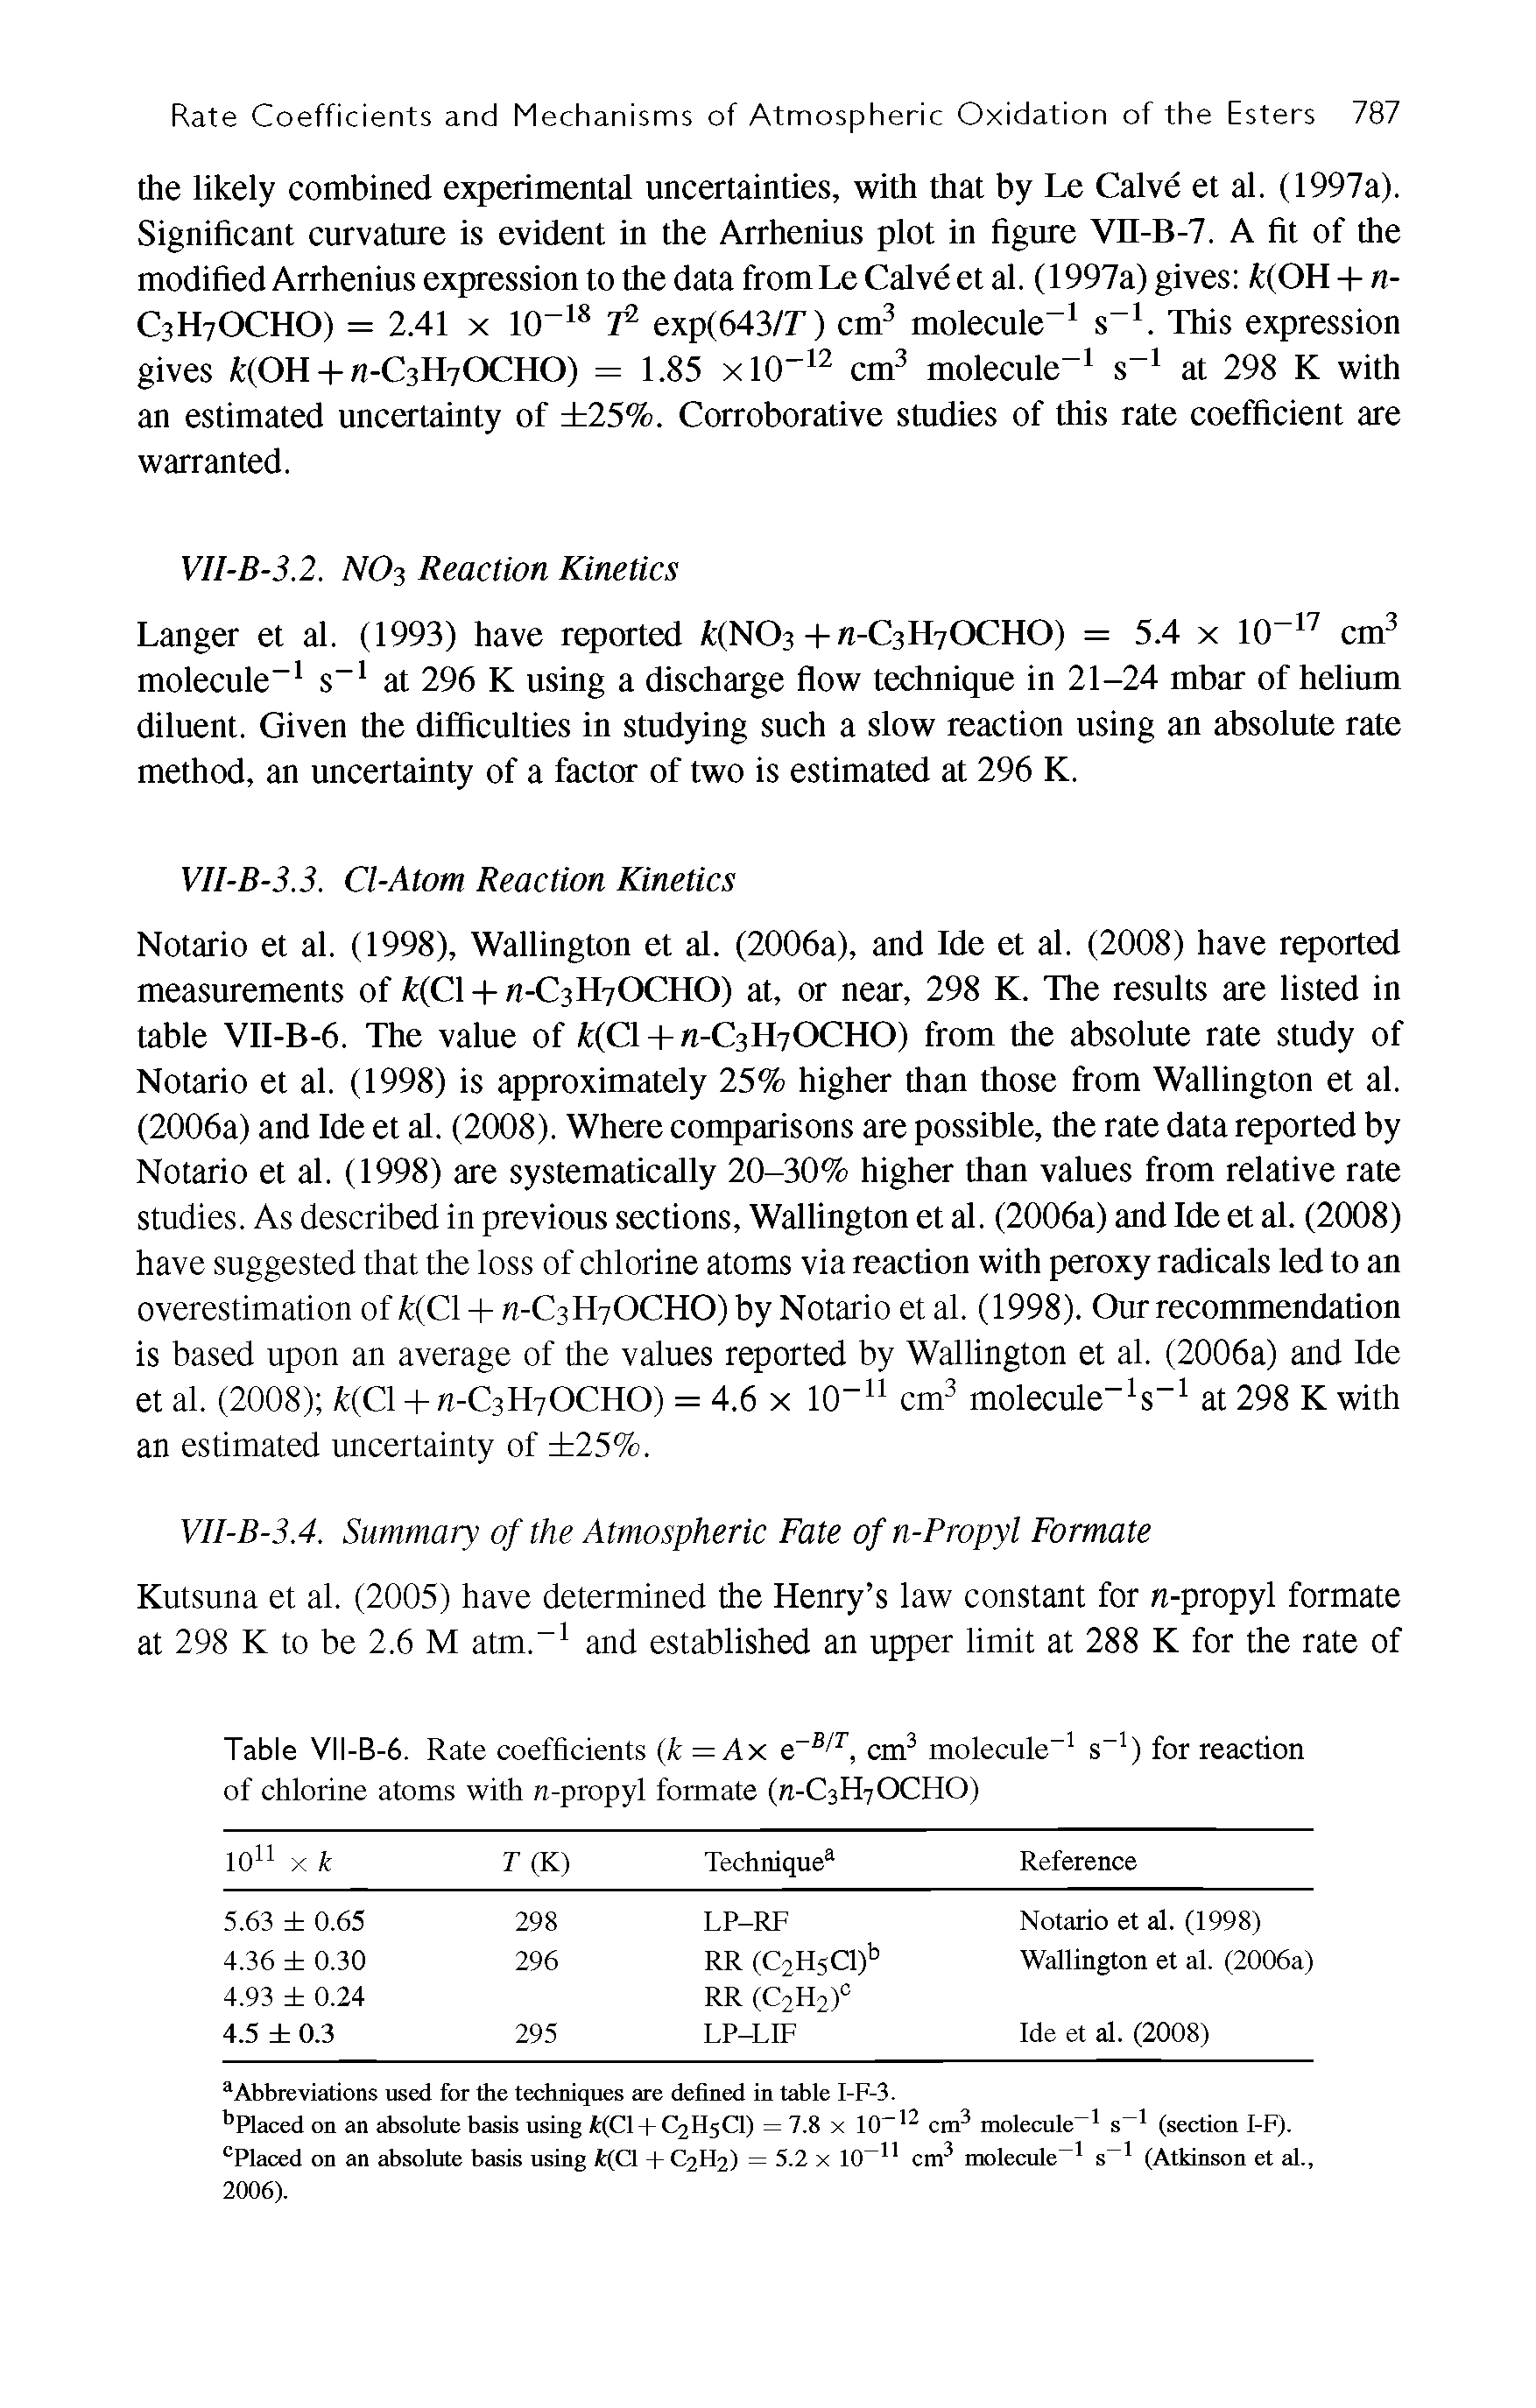 Table Vll-B-6. Rate coefficients k = Ax e cm molecule s ) for reaction of chlorine atoms with n-propyl formate (n-C3H7CX2HO)...